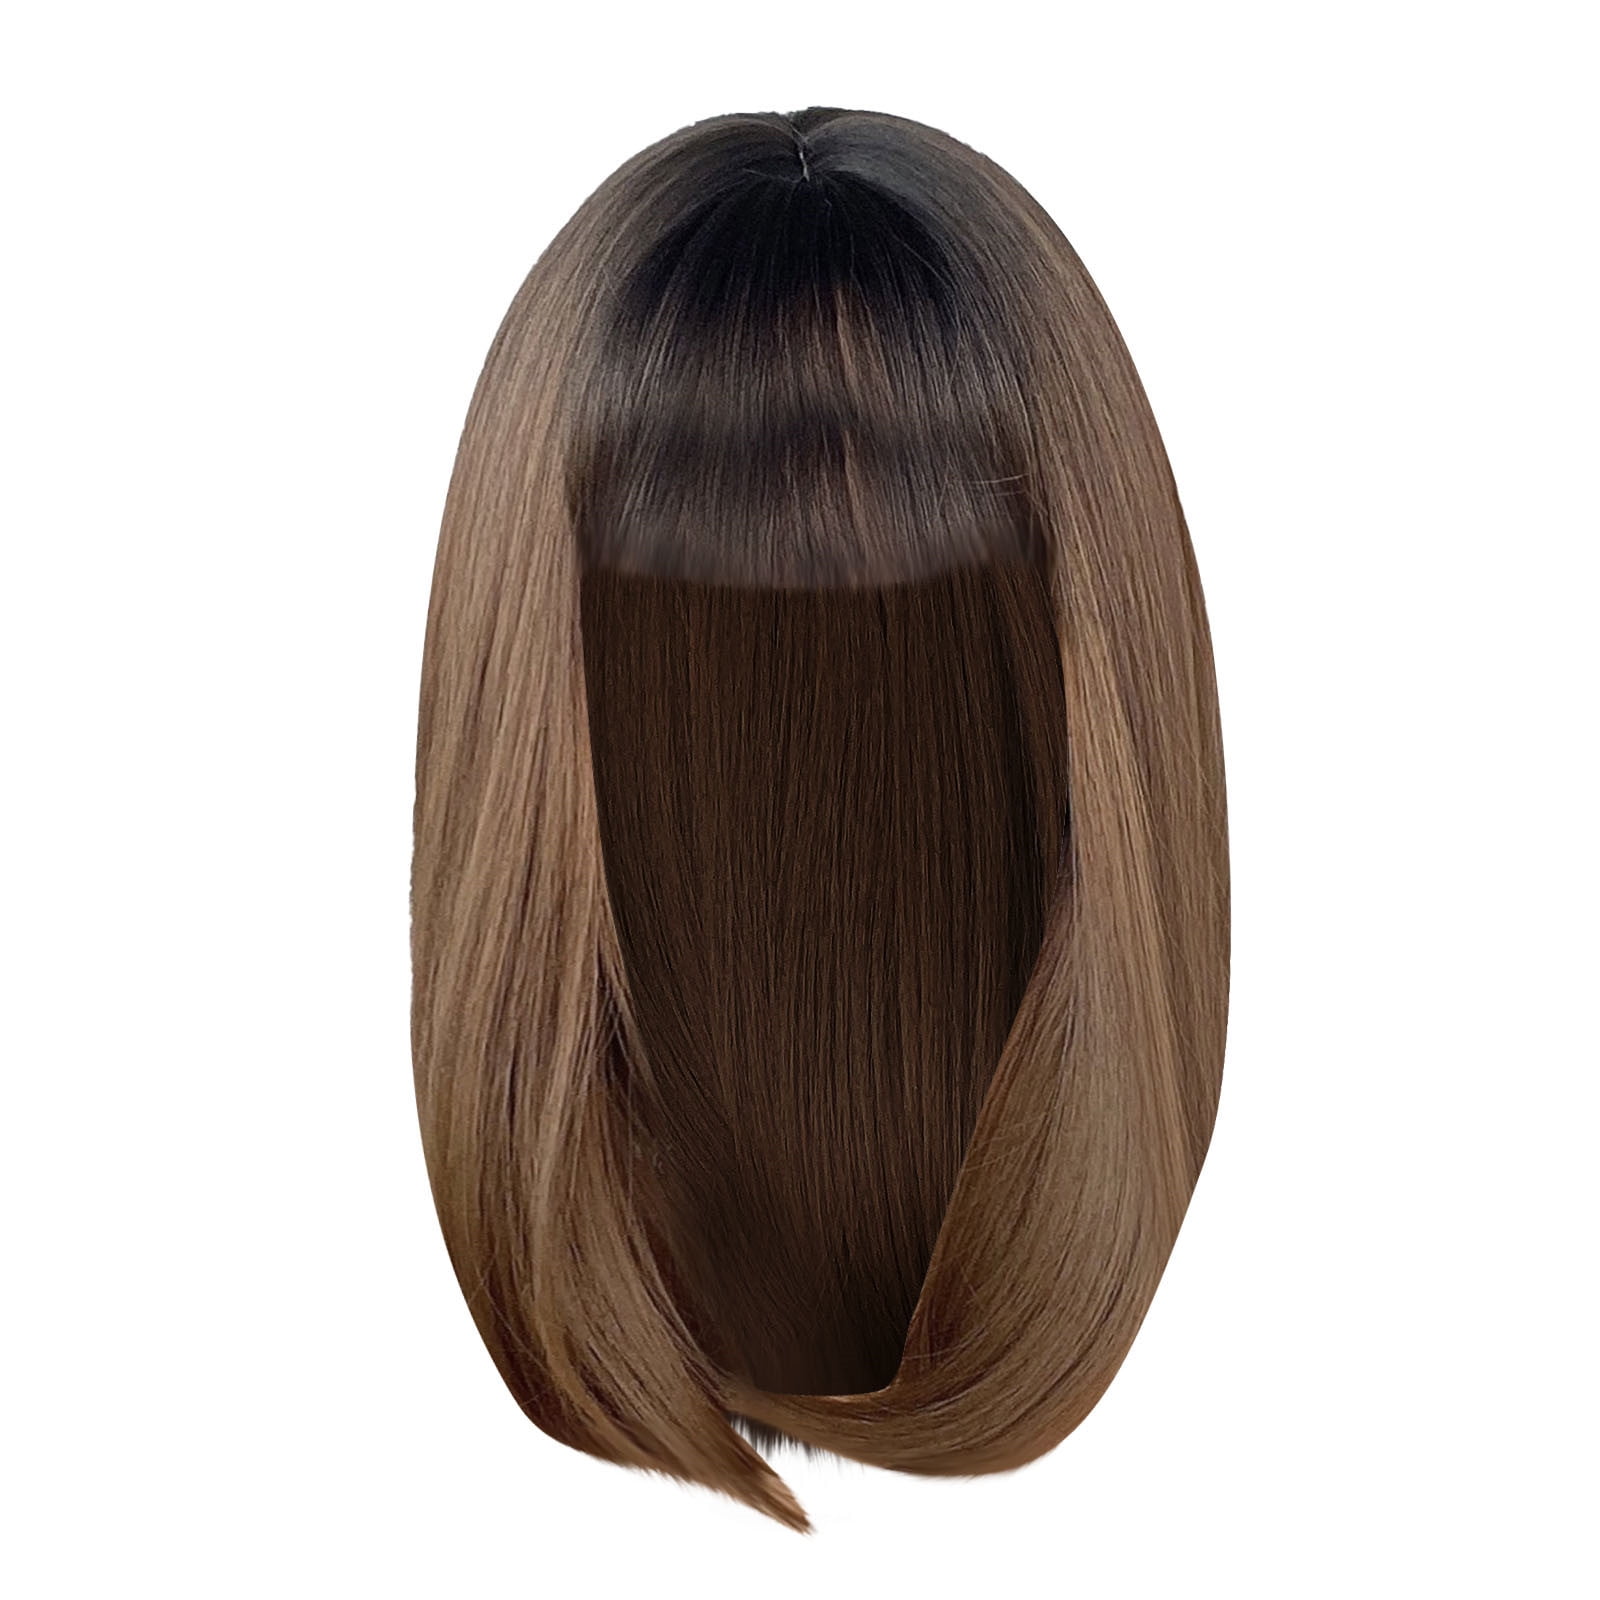 HSMQHJWE Human Hair Straight Lace Front Wigs 30 Dollars Front Hair Wig Bob  Hair Lengthened High Mid-length Wig Female Lace Temperature- Wig Mid-point  Lace Hair Clavicle Mens Hair Product 